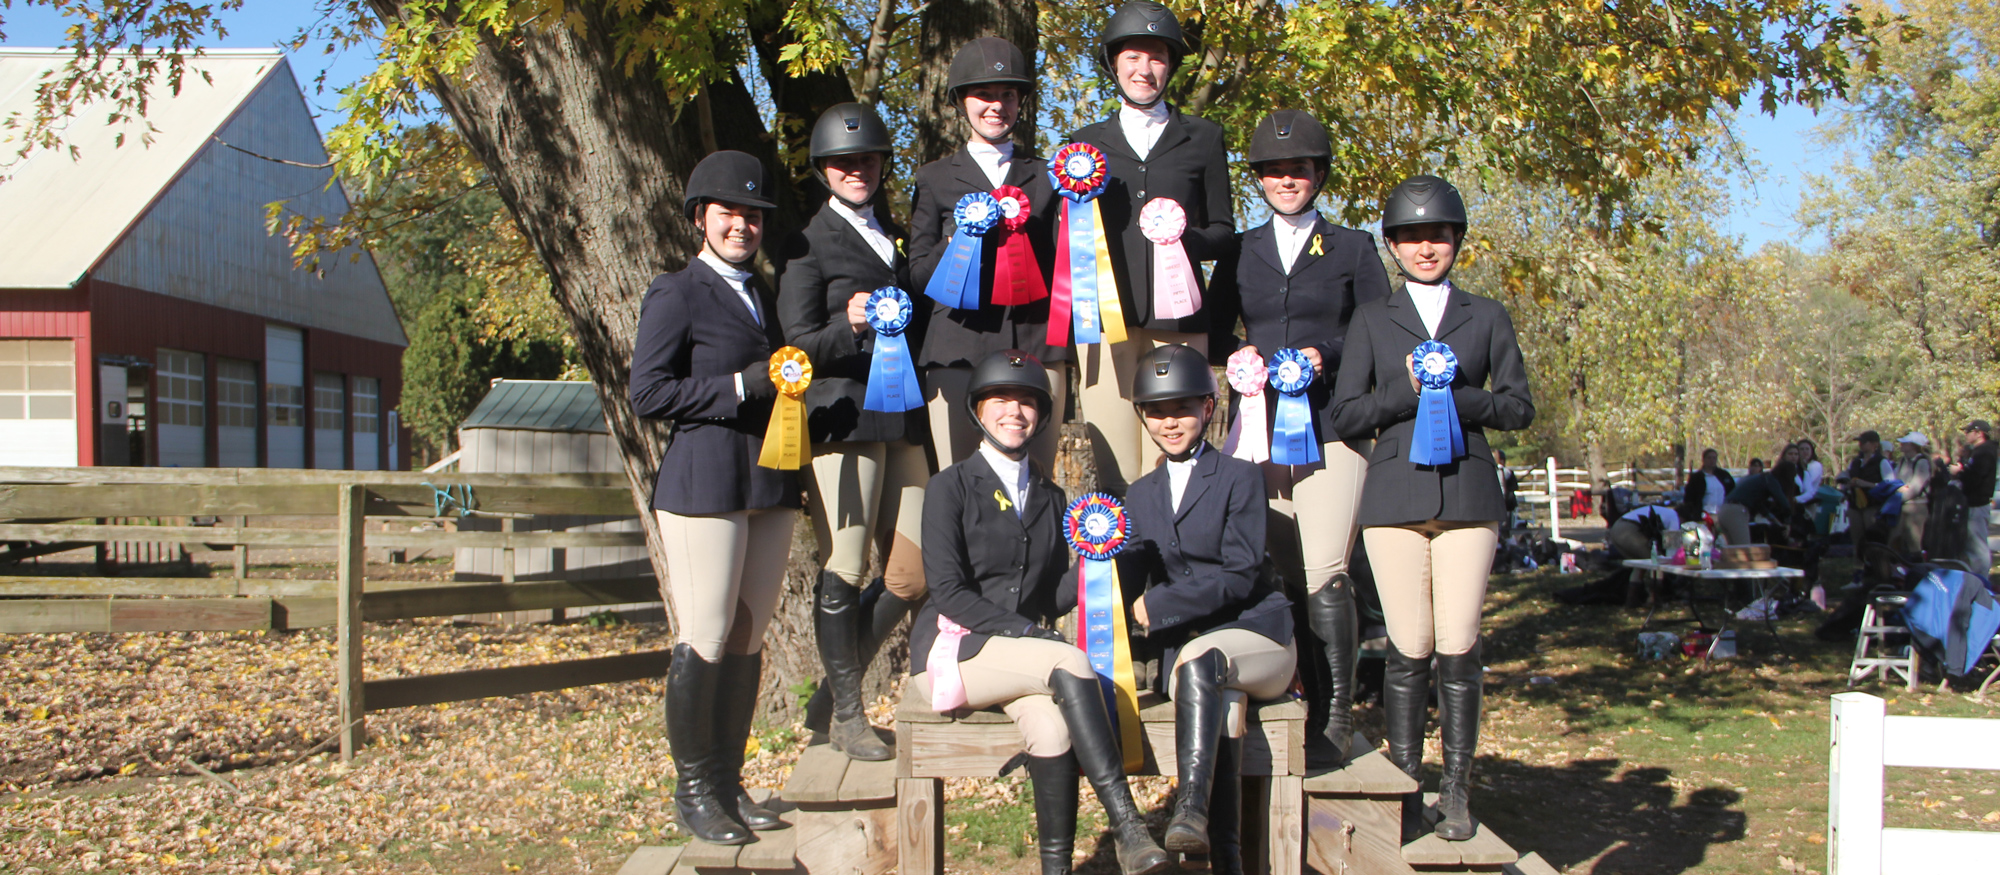 Mount Holyoke equestrian team seniors who showed at the UMass Amherst Show on Oct. 22, 2022 at Muddy Brook Farm in Amherst.